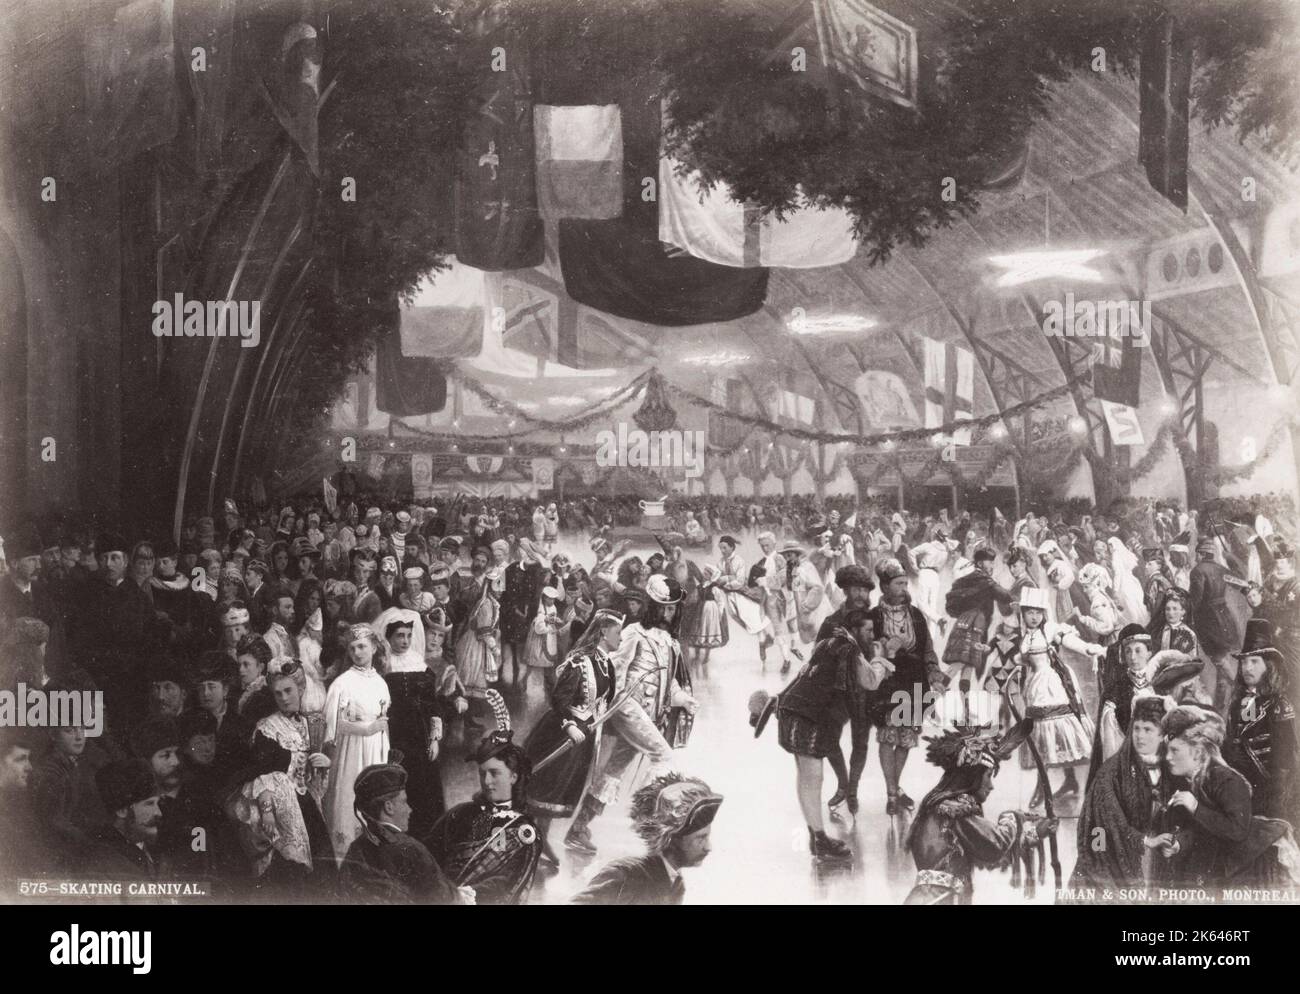 c.1900 vintage photograph: skating carnival photo composition by the William Notman studio, Canada. Stock Photo